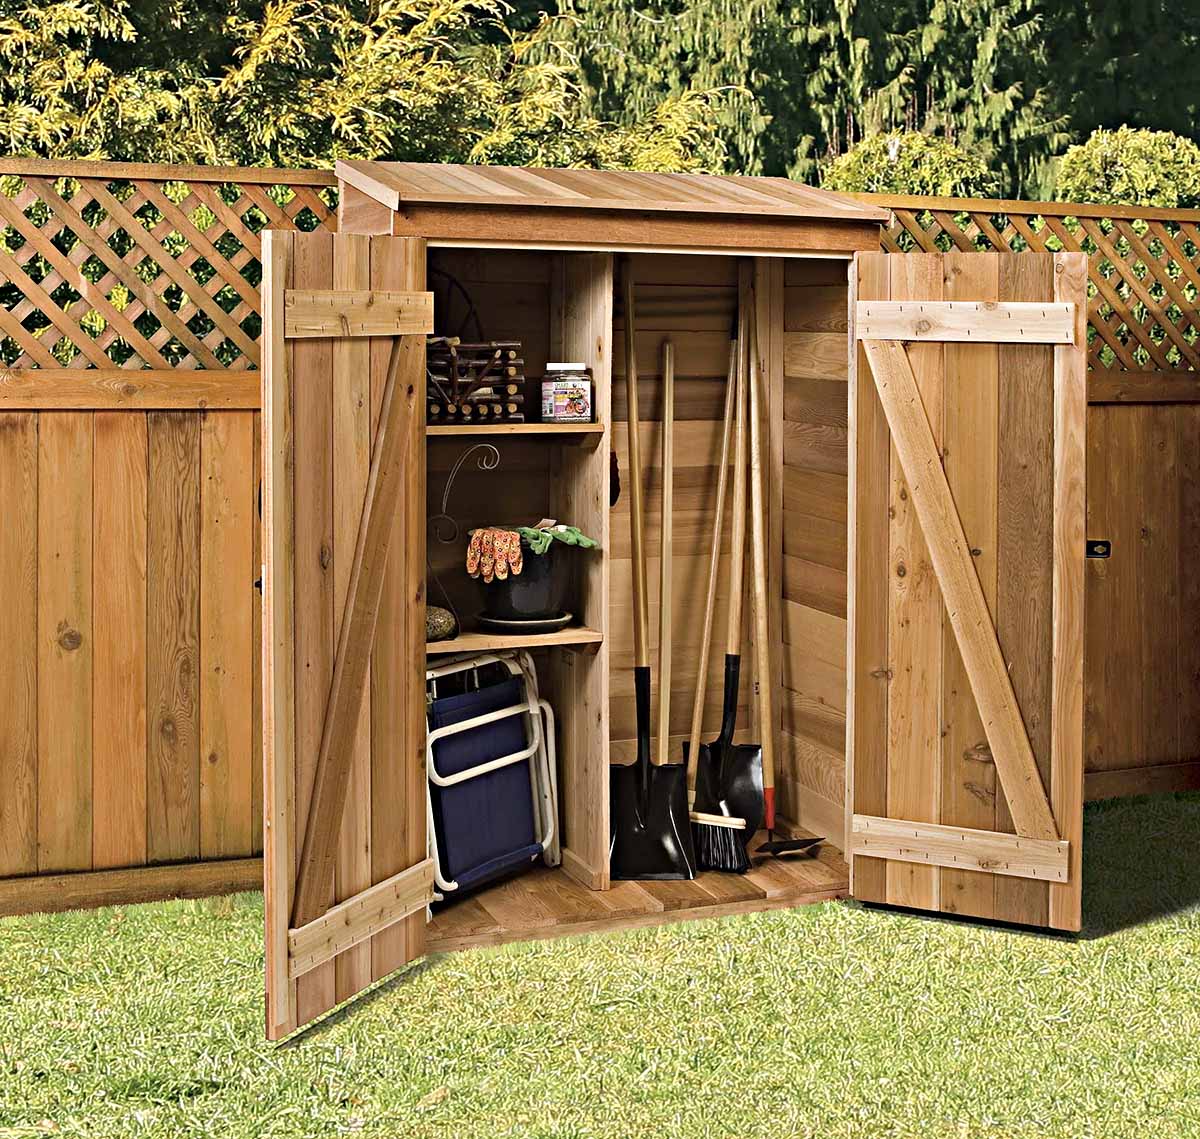 How To Build A Garden Tool Shed | Storables